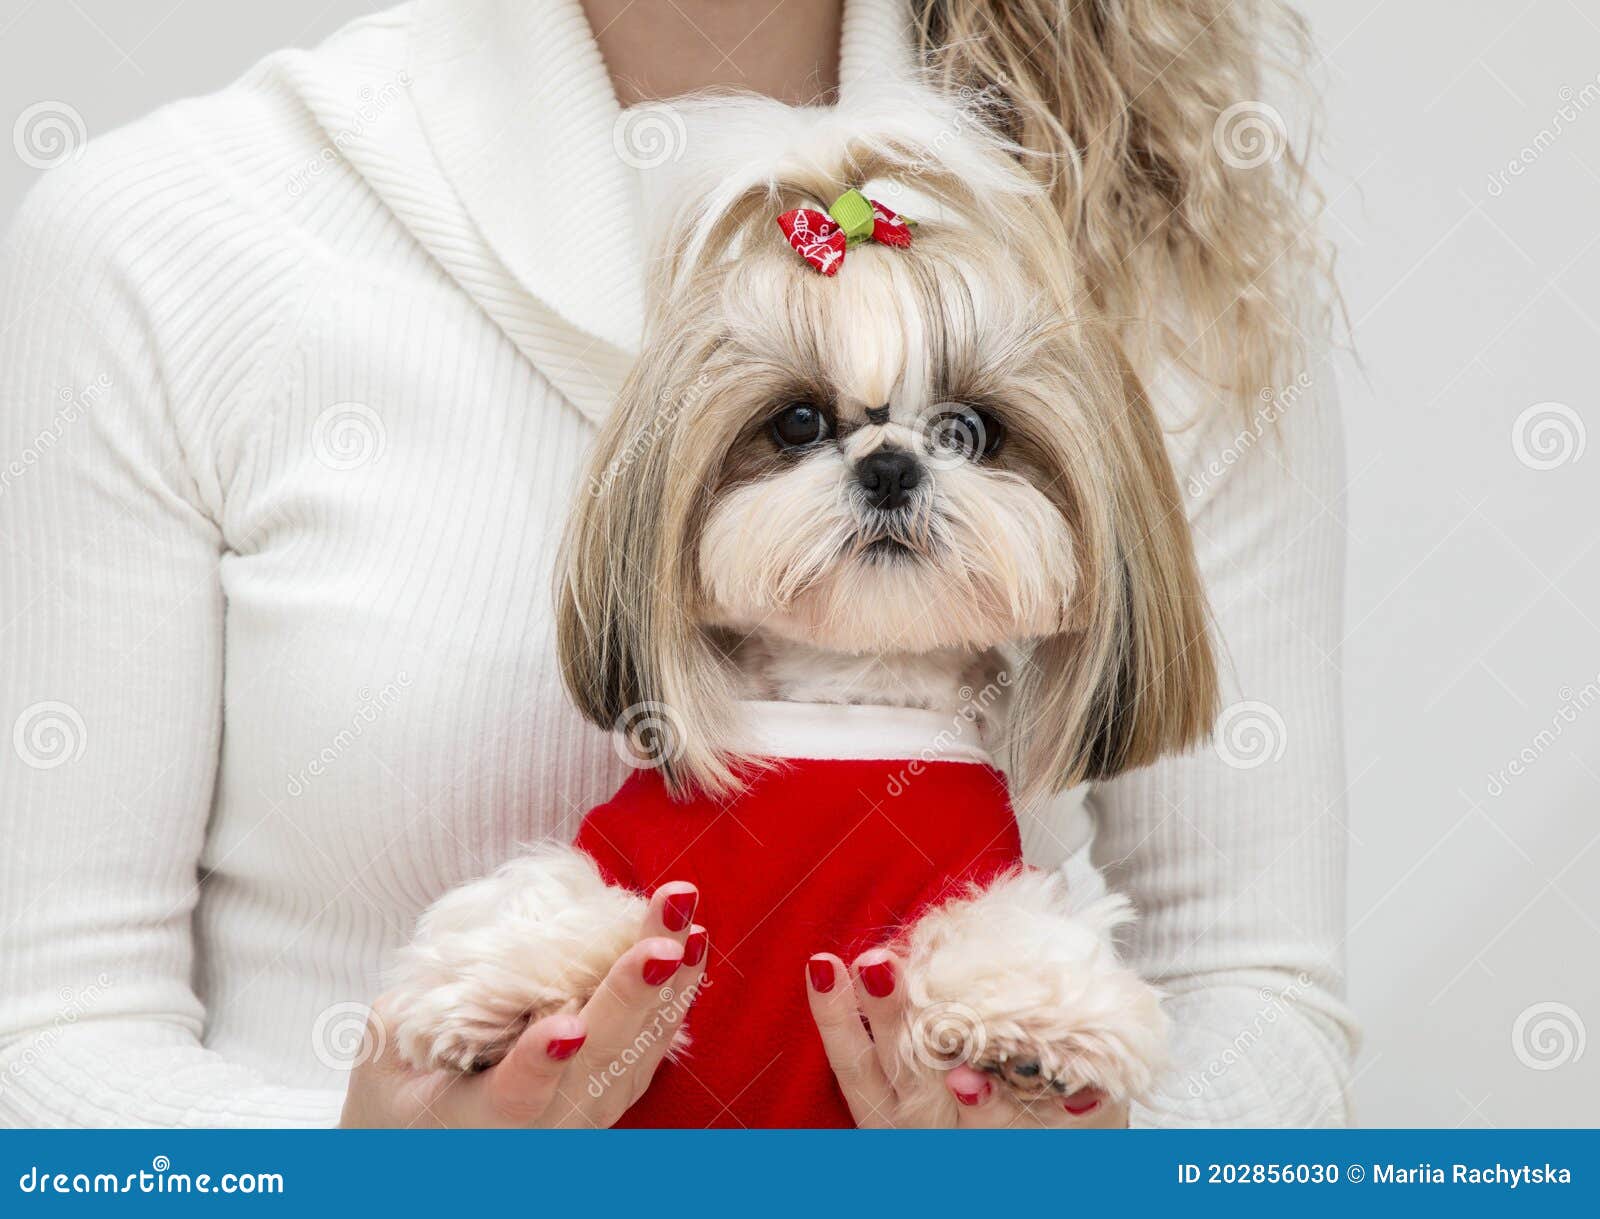 Lovely Girl with a Well-groomed and Nicely Dressed Shih Tzu Puppy for  Christmas Stock Photo - Image of beautifully, cool: 202856030